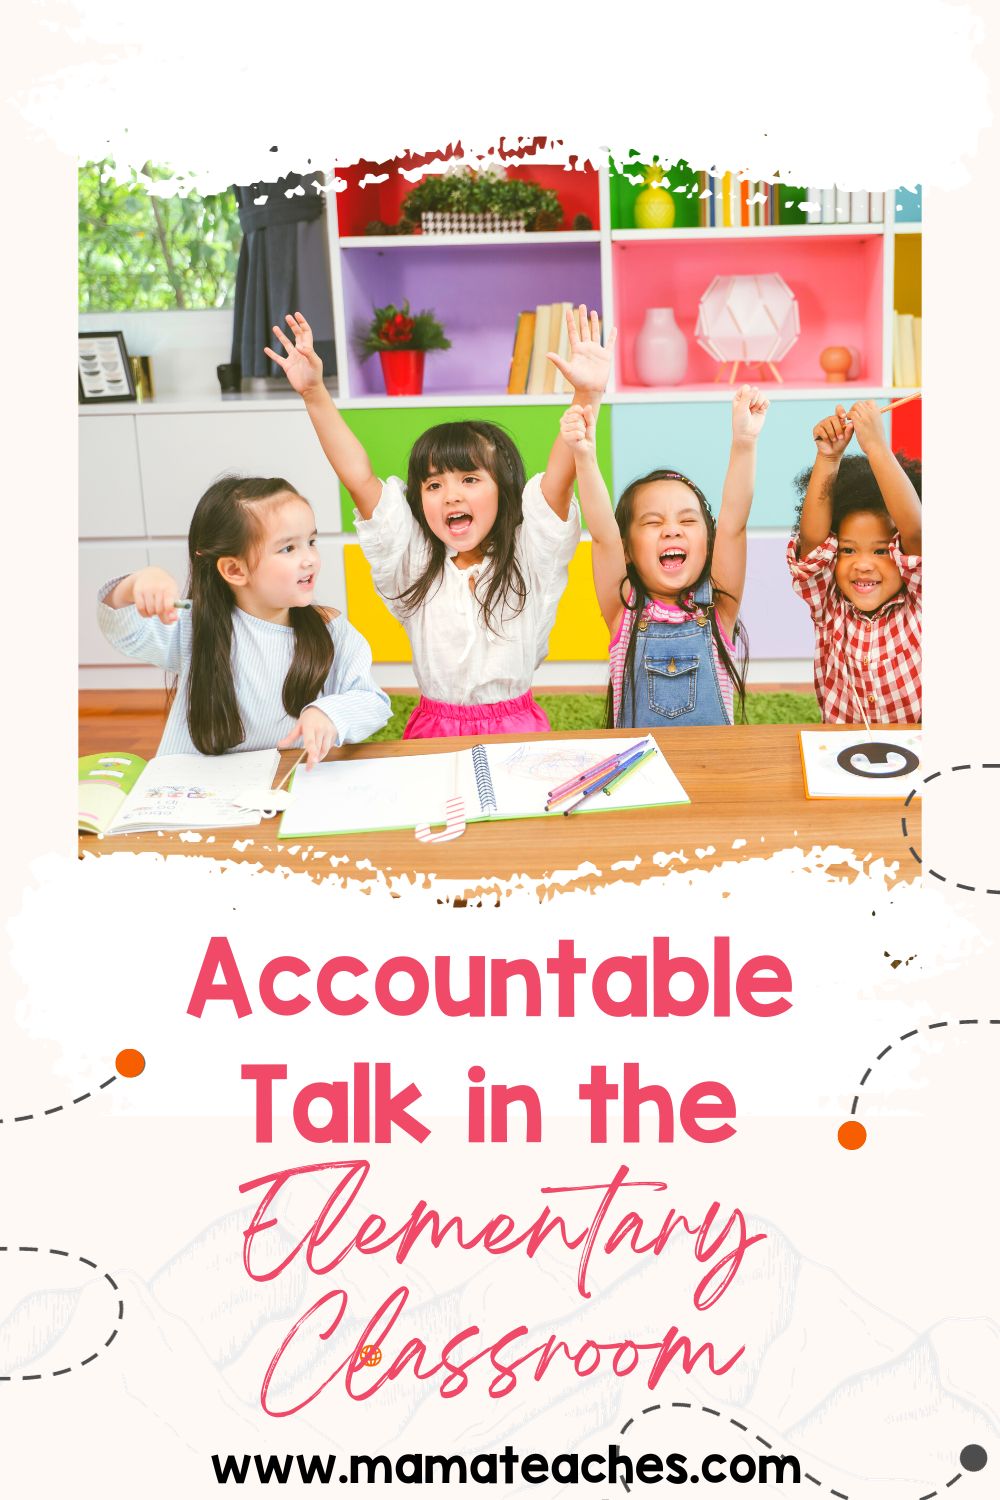 A Accountable Talk in the Elementary Classroom